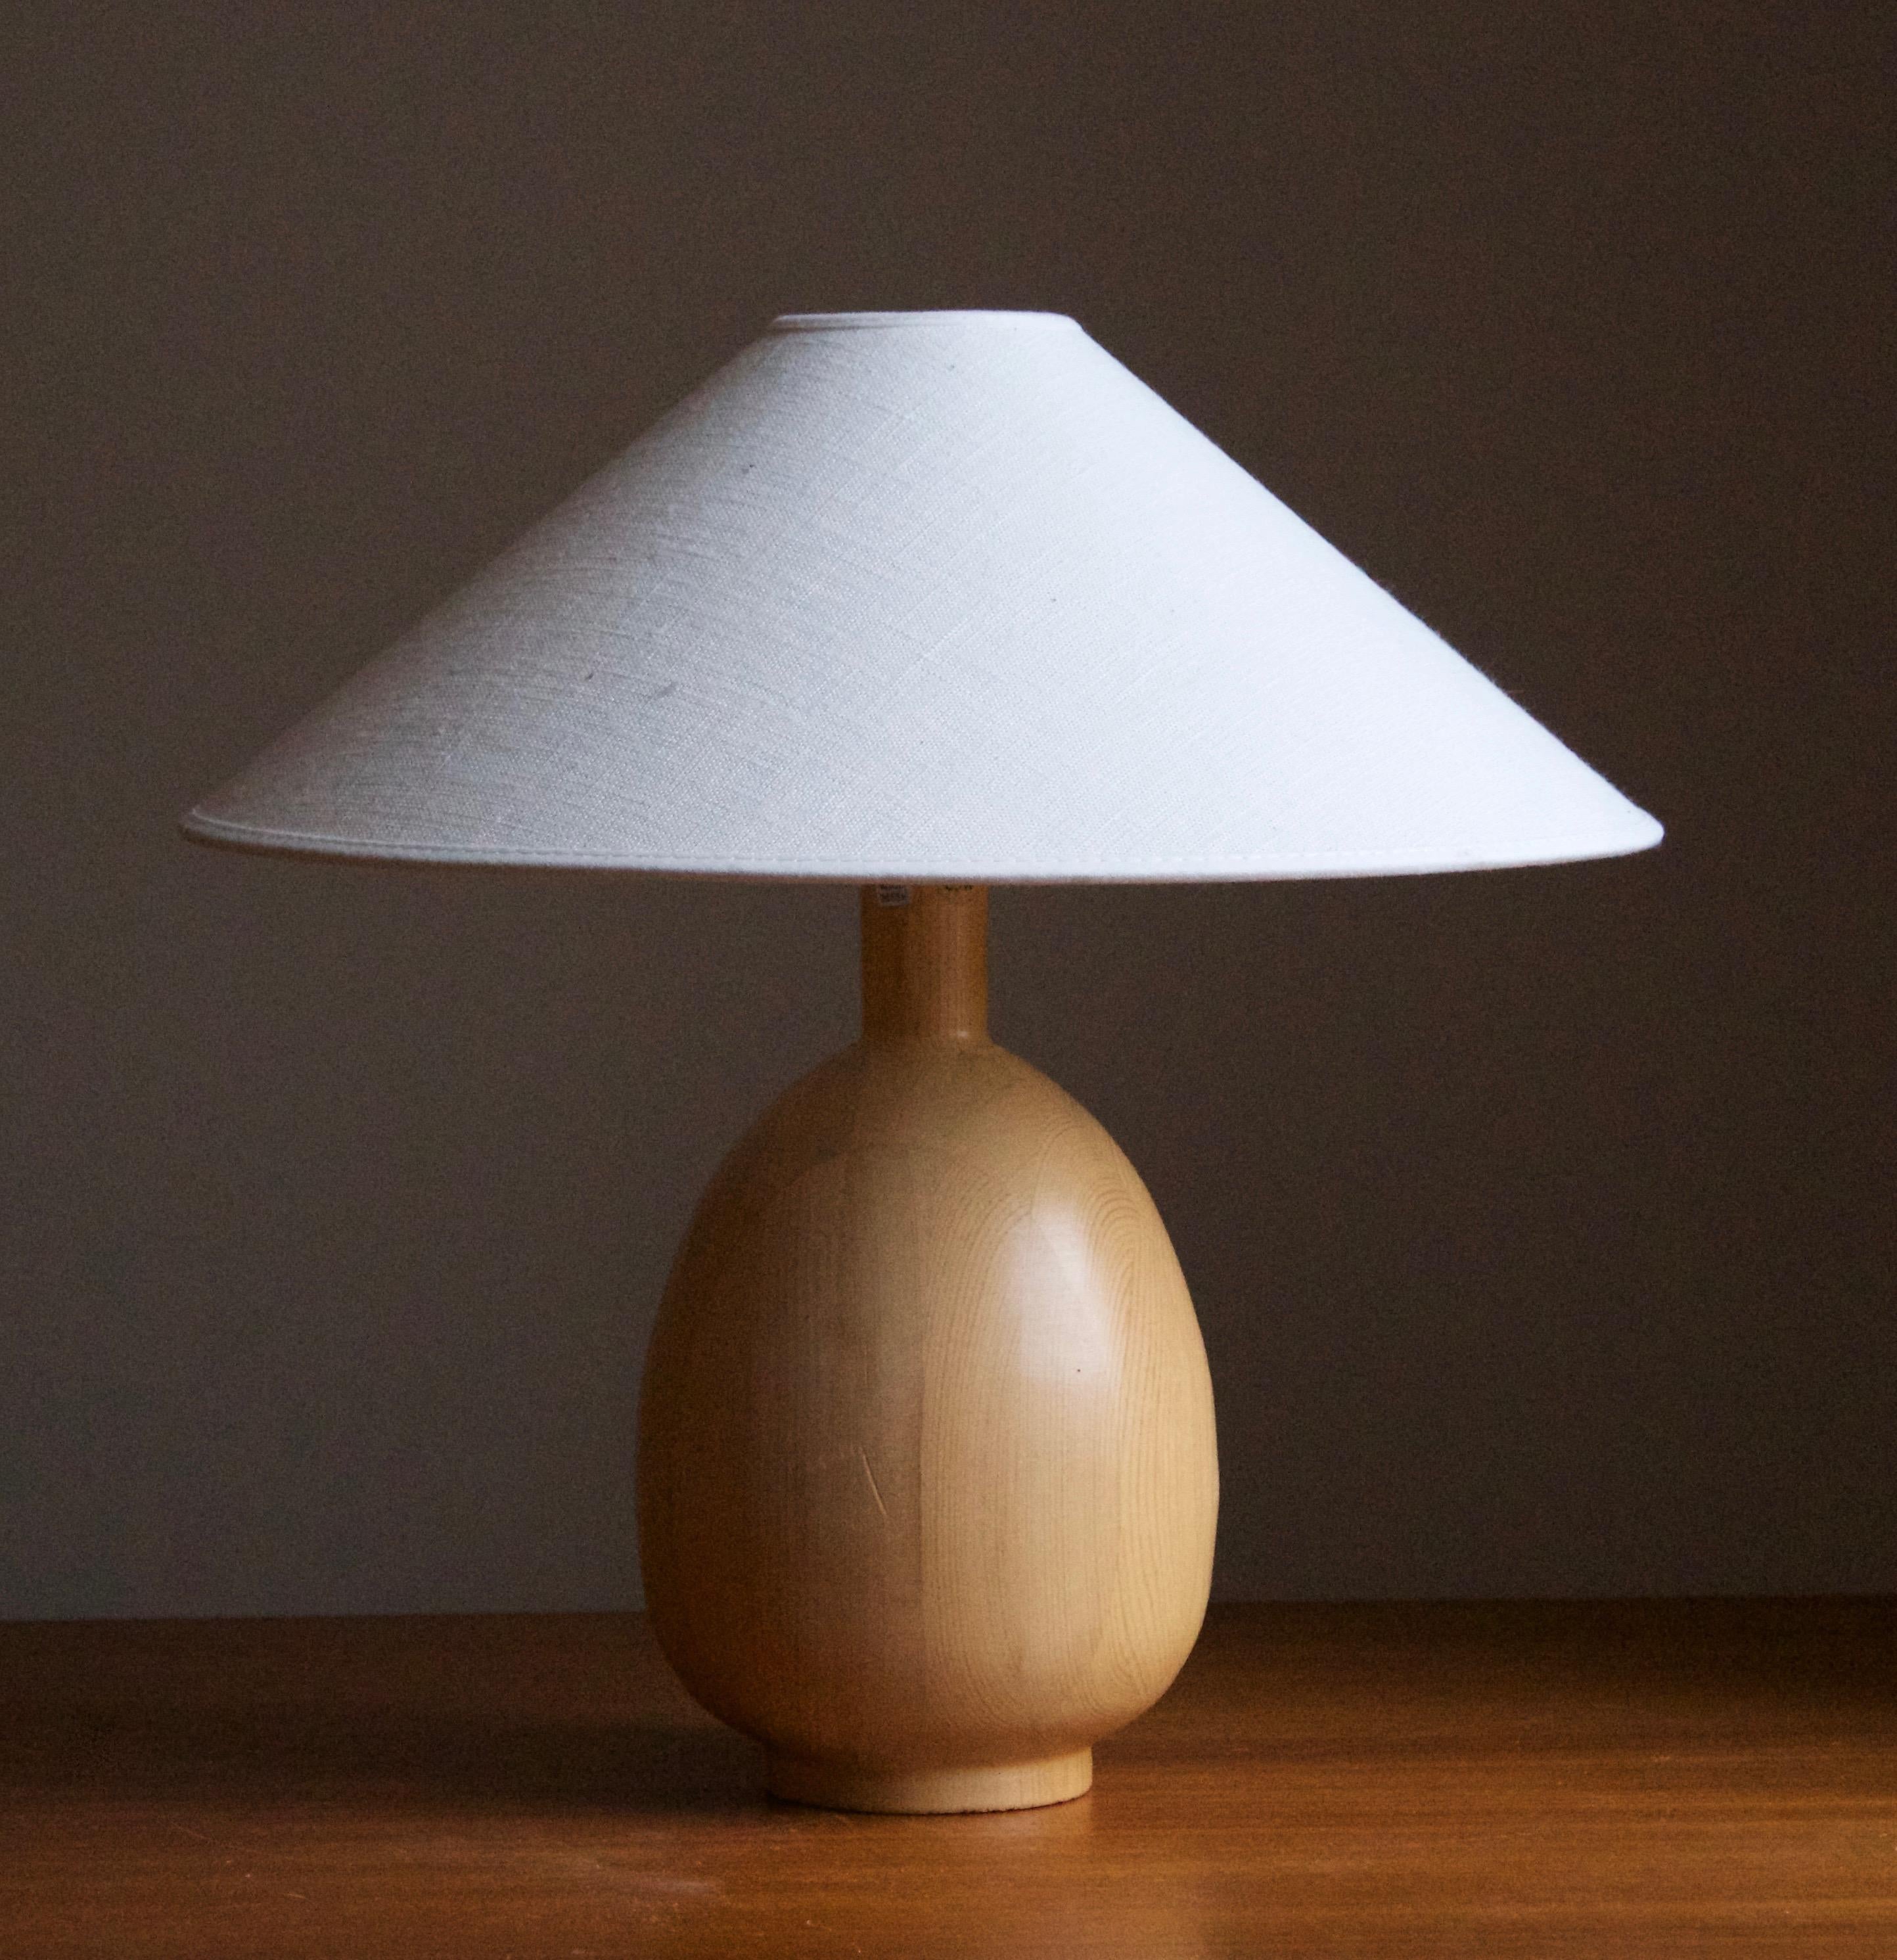 A pair of sizable table lamps. In solid pine. Produced by Markslöjd, Kinna, Sweden, c. 1970s-1980s.

Stated dimensions exclude lampshade. Height includes socket. Sold without lampshade.